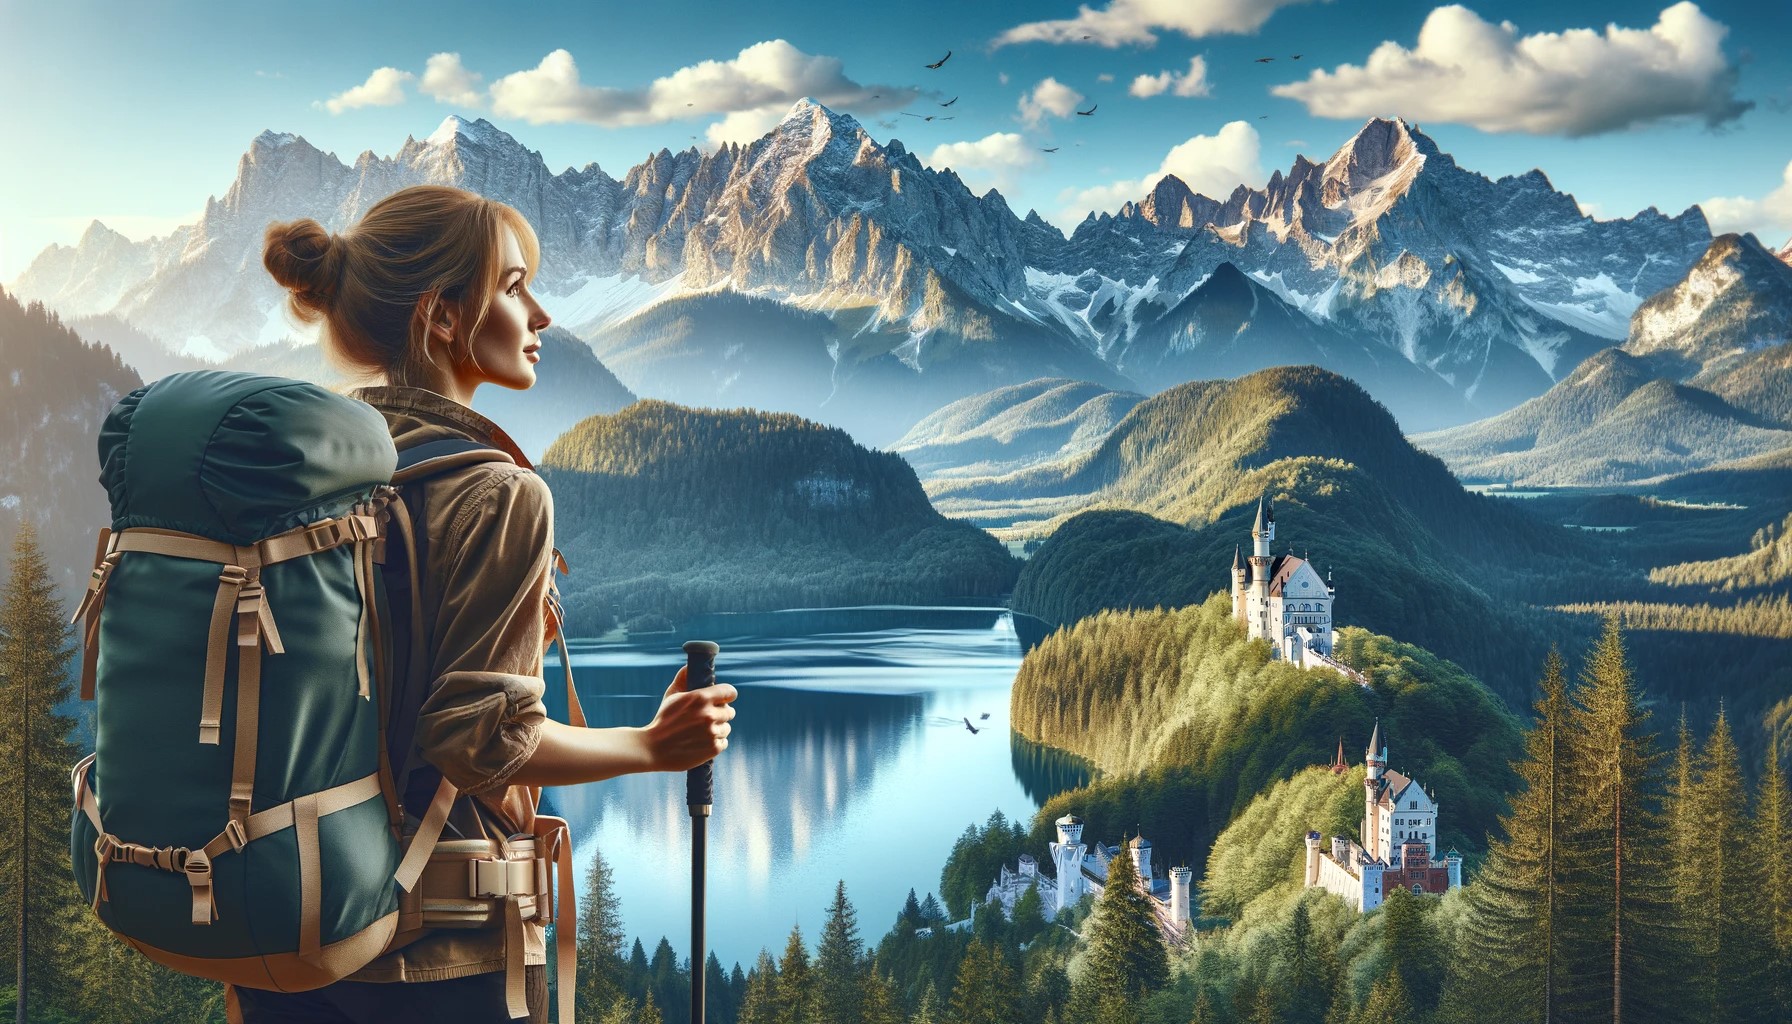 An awe-inspiring view of the Bavarian Alps with a female hiker in the foreground. She is gazing at the majestic mountain range, embodying the spirit o